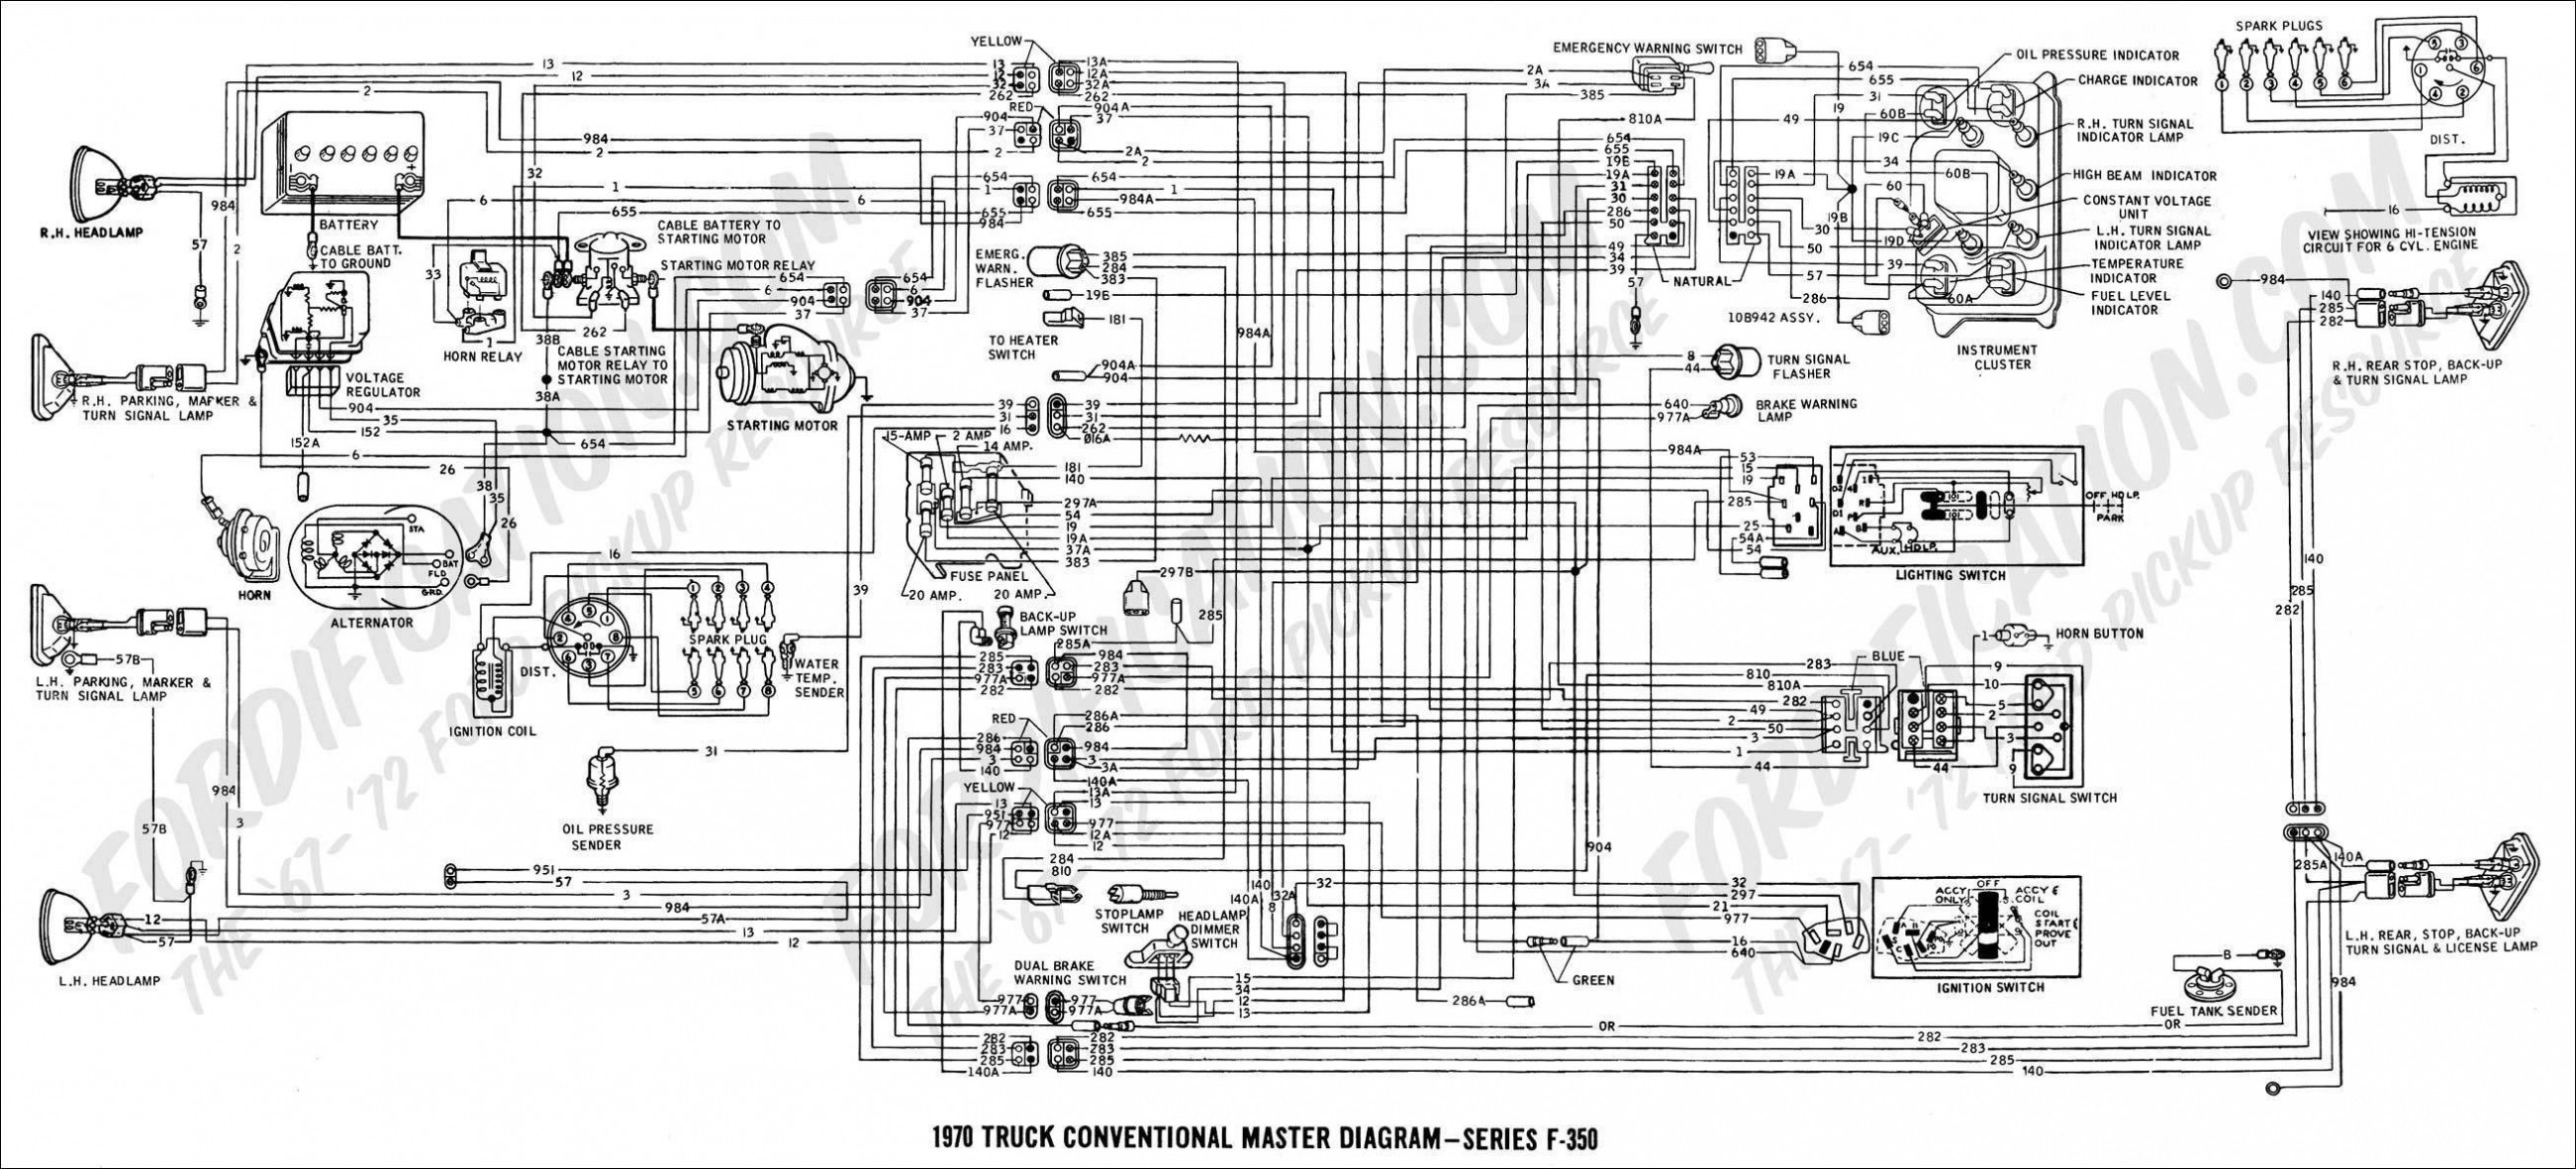 Ford F350 Parts Diagram 2000 ford F350 Starter Wiring Diagram Wiring Diagram Data Val Of Ford F350 Parts Diagram